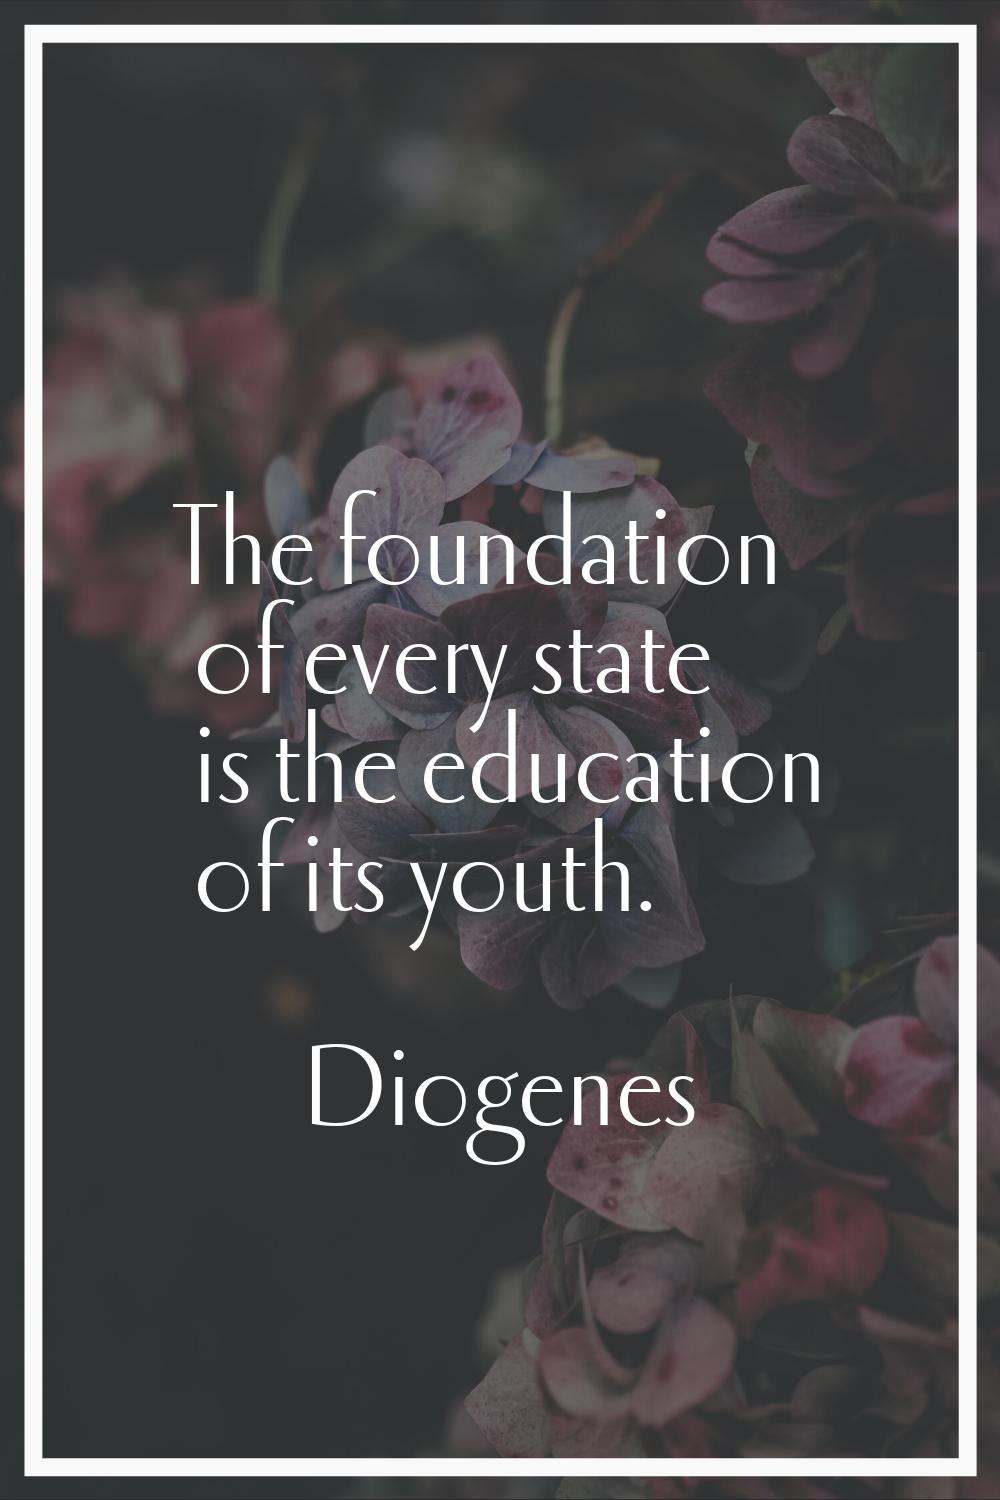 The foundation of every state is the education of its youth.